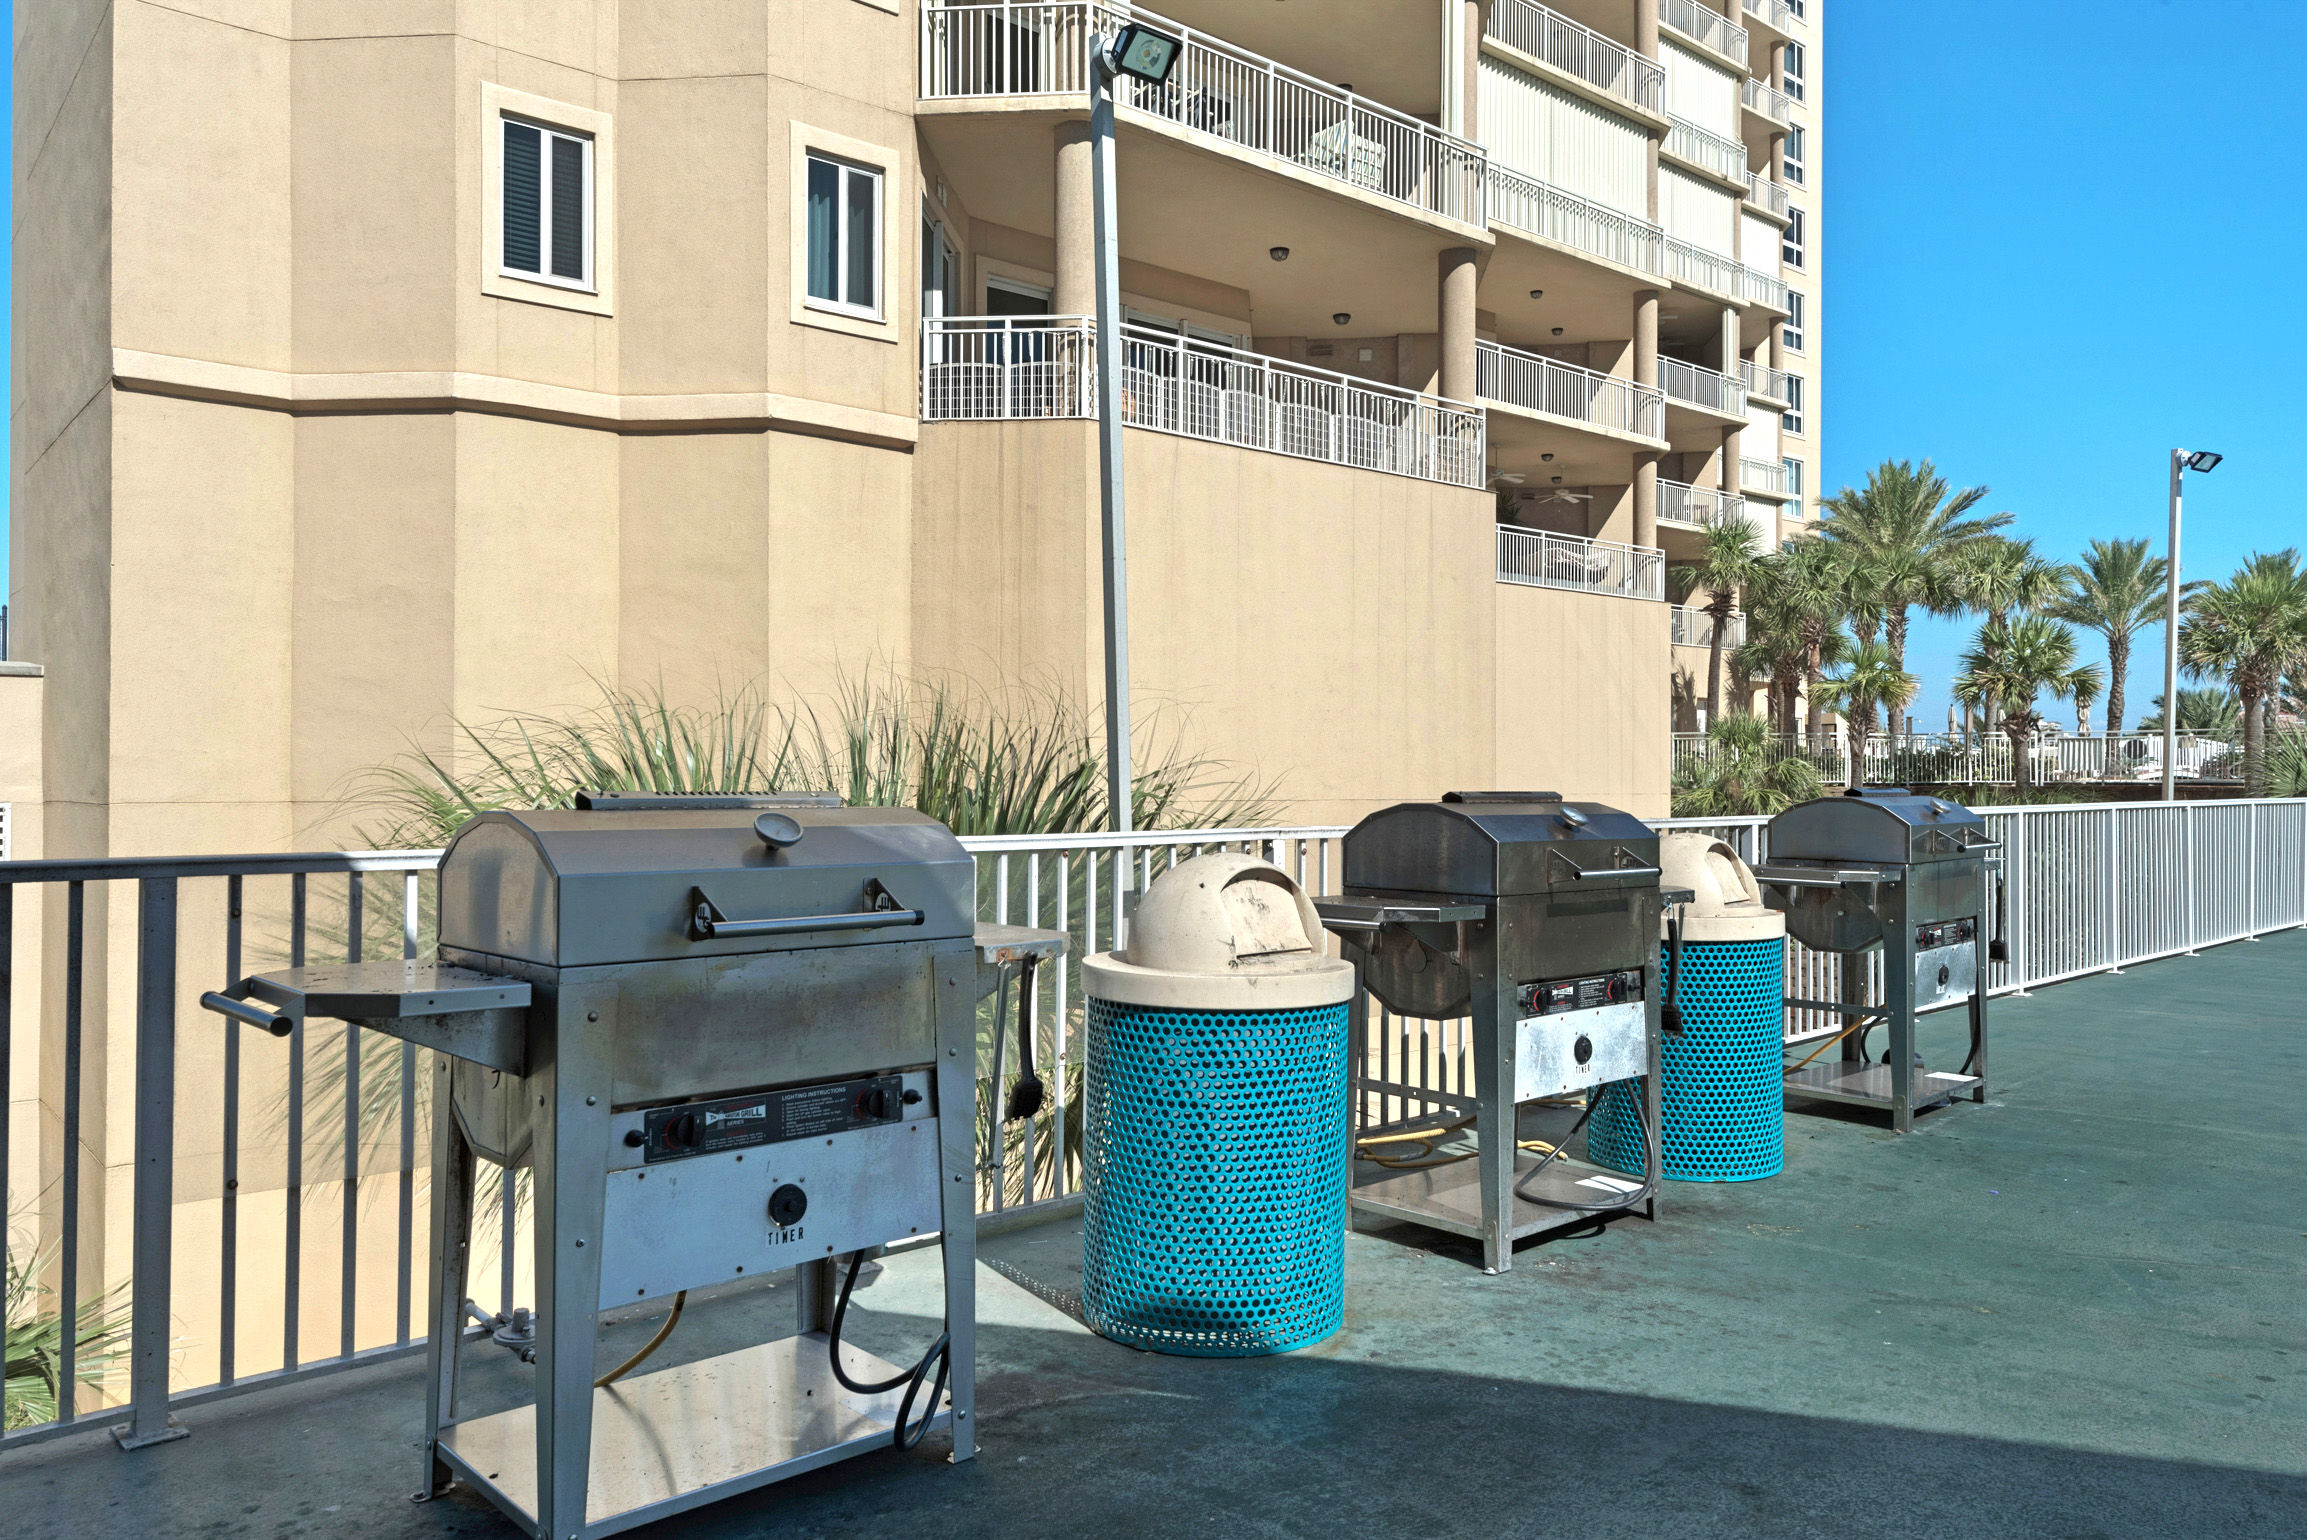 Gas Grills for your use